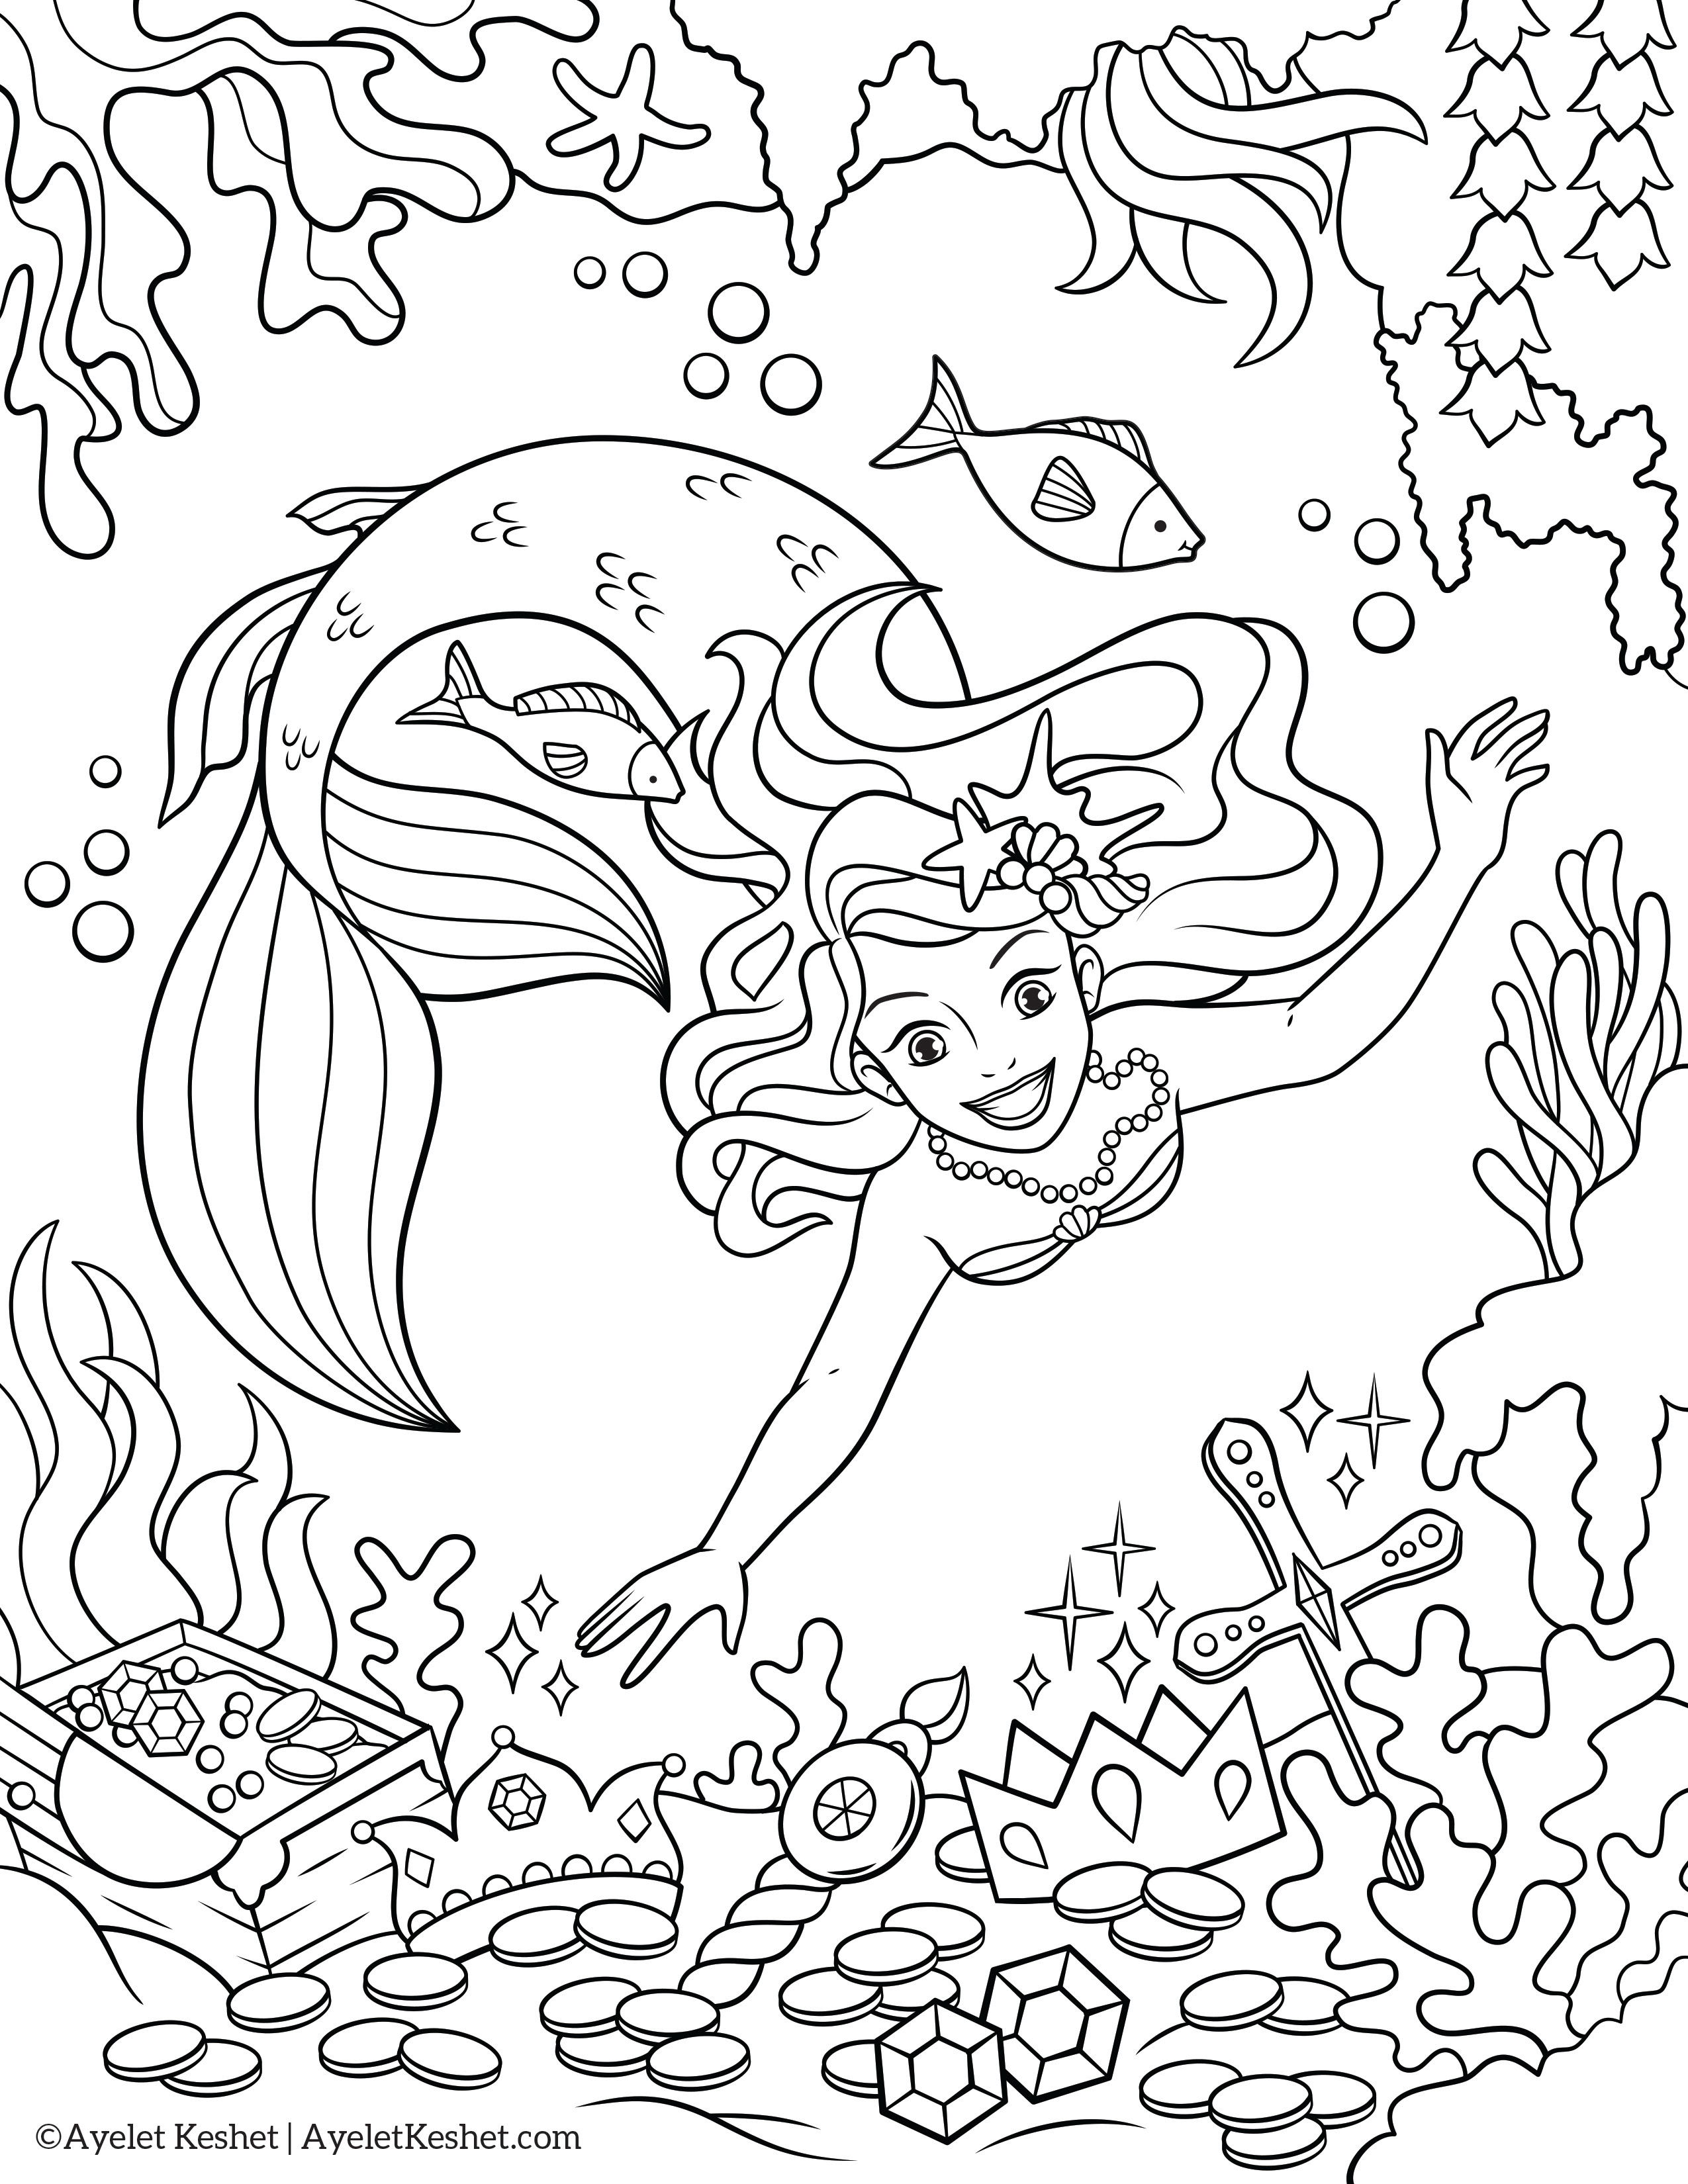 Mermaid Coloring Pages Coloringnori Coloring Pages For Kids